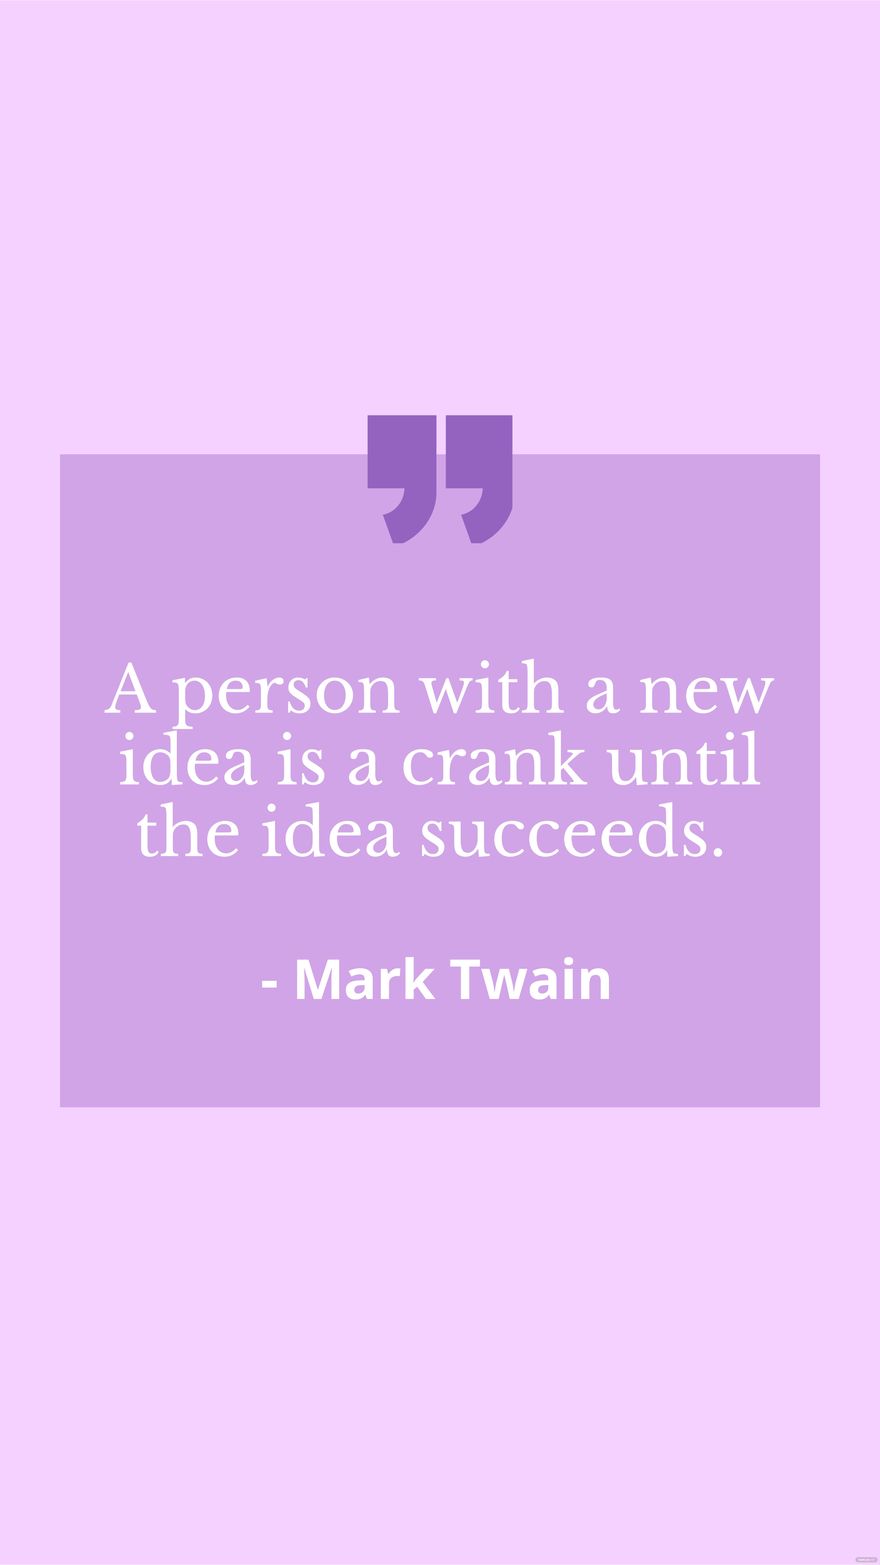 Mark Twain - A person with a new idea is a crank until the idea succeeds. in JPG